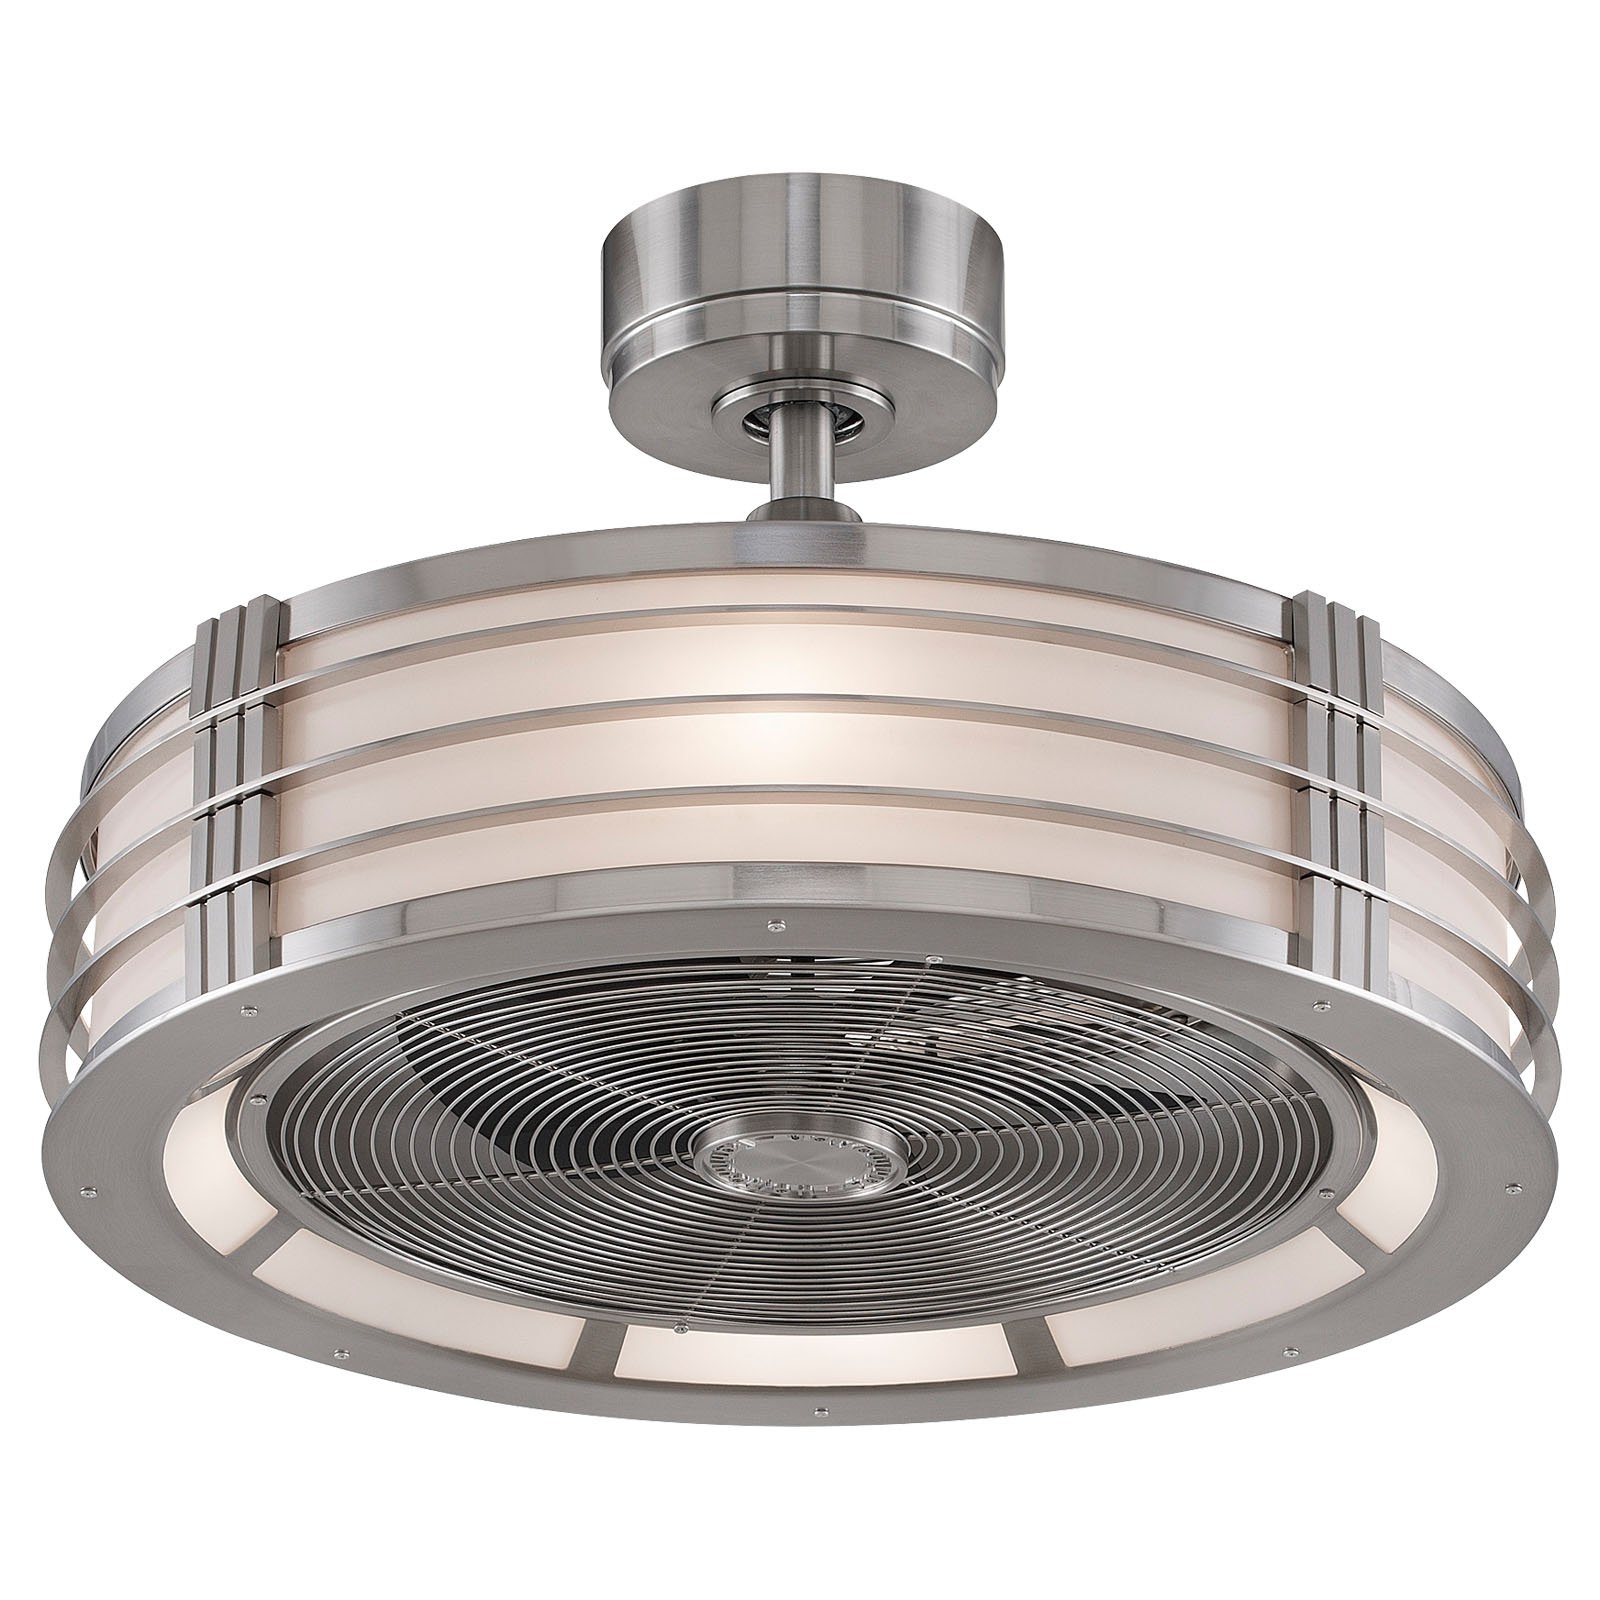 Permalink to Exhale Bladeless Ceiling Fan With Light